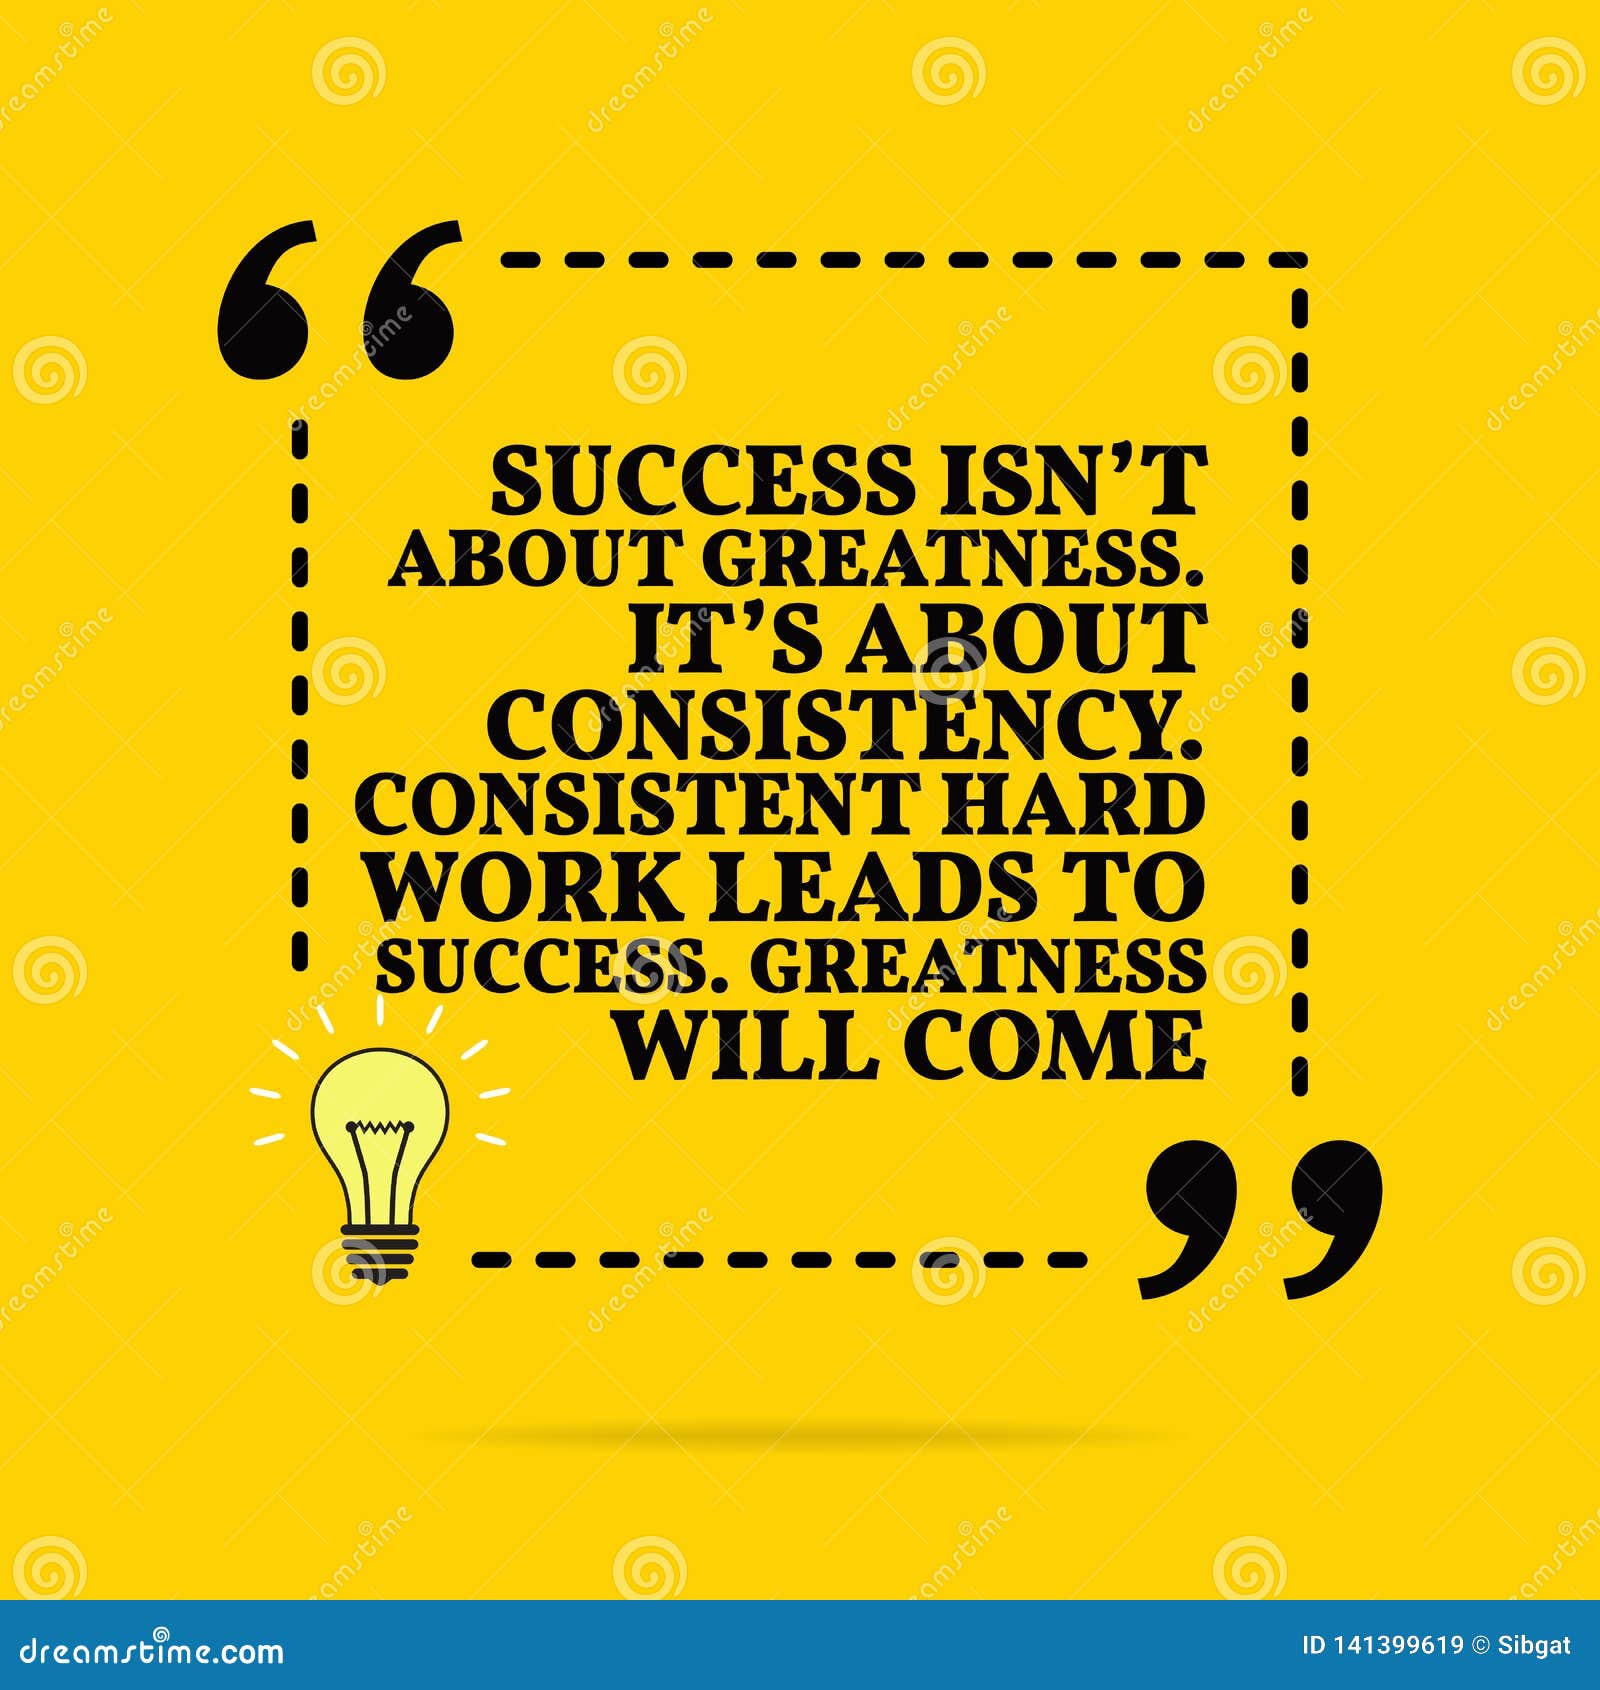 Inspiring Quotes About Success